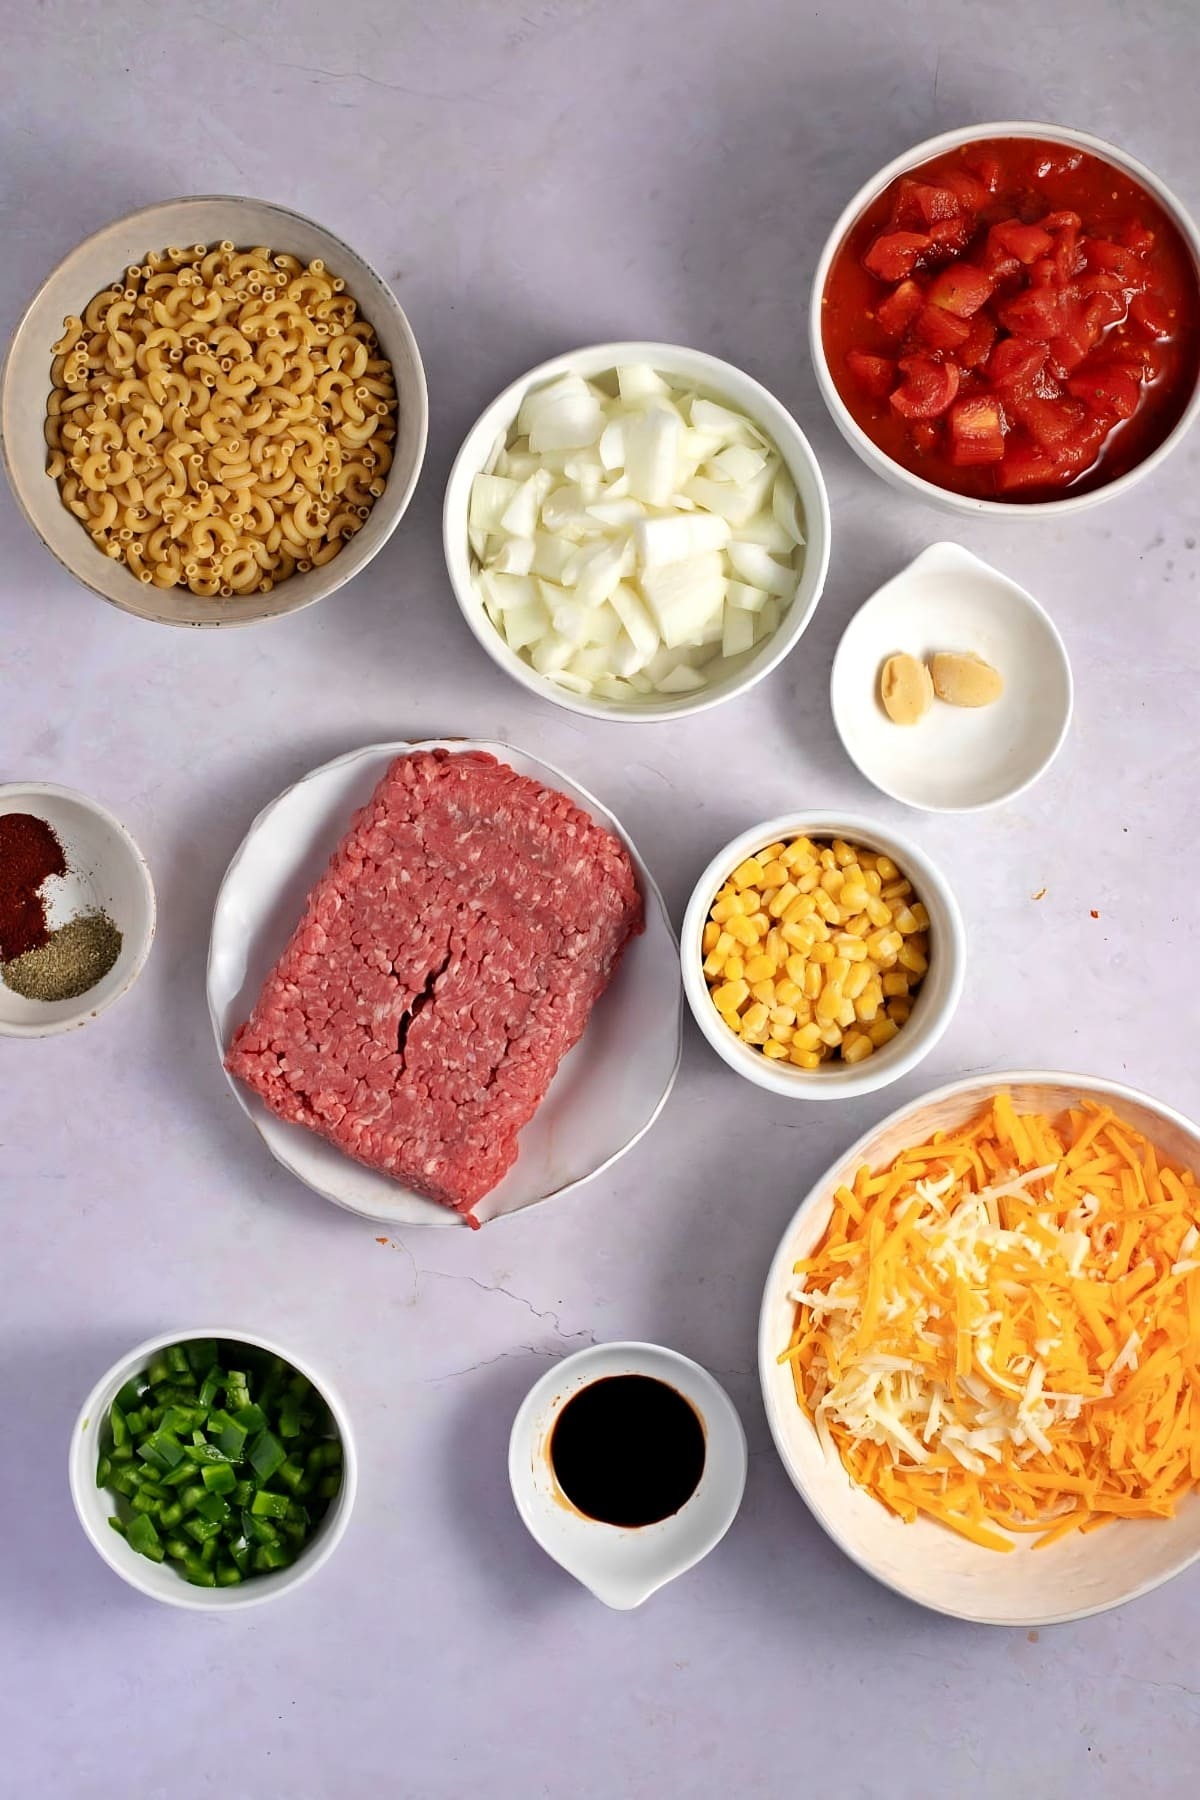 Cheeseburger Casserole Ingredients - Ground Beef, Onions, Canned Diced Tomatoes, Elbow Macaroni, Corn Kernels, Green Bell Peppers, Garlic, Seasonings, Shredded Mexican Cheese Blend